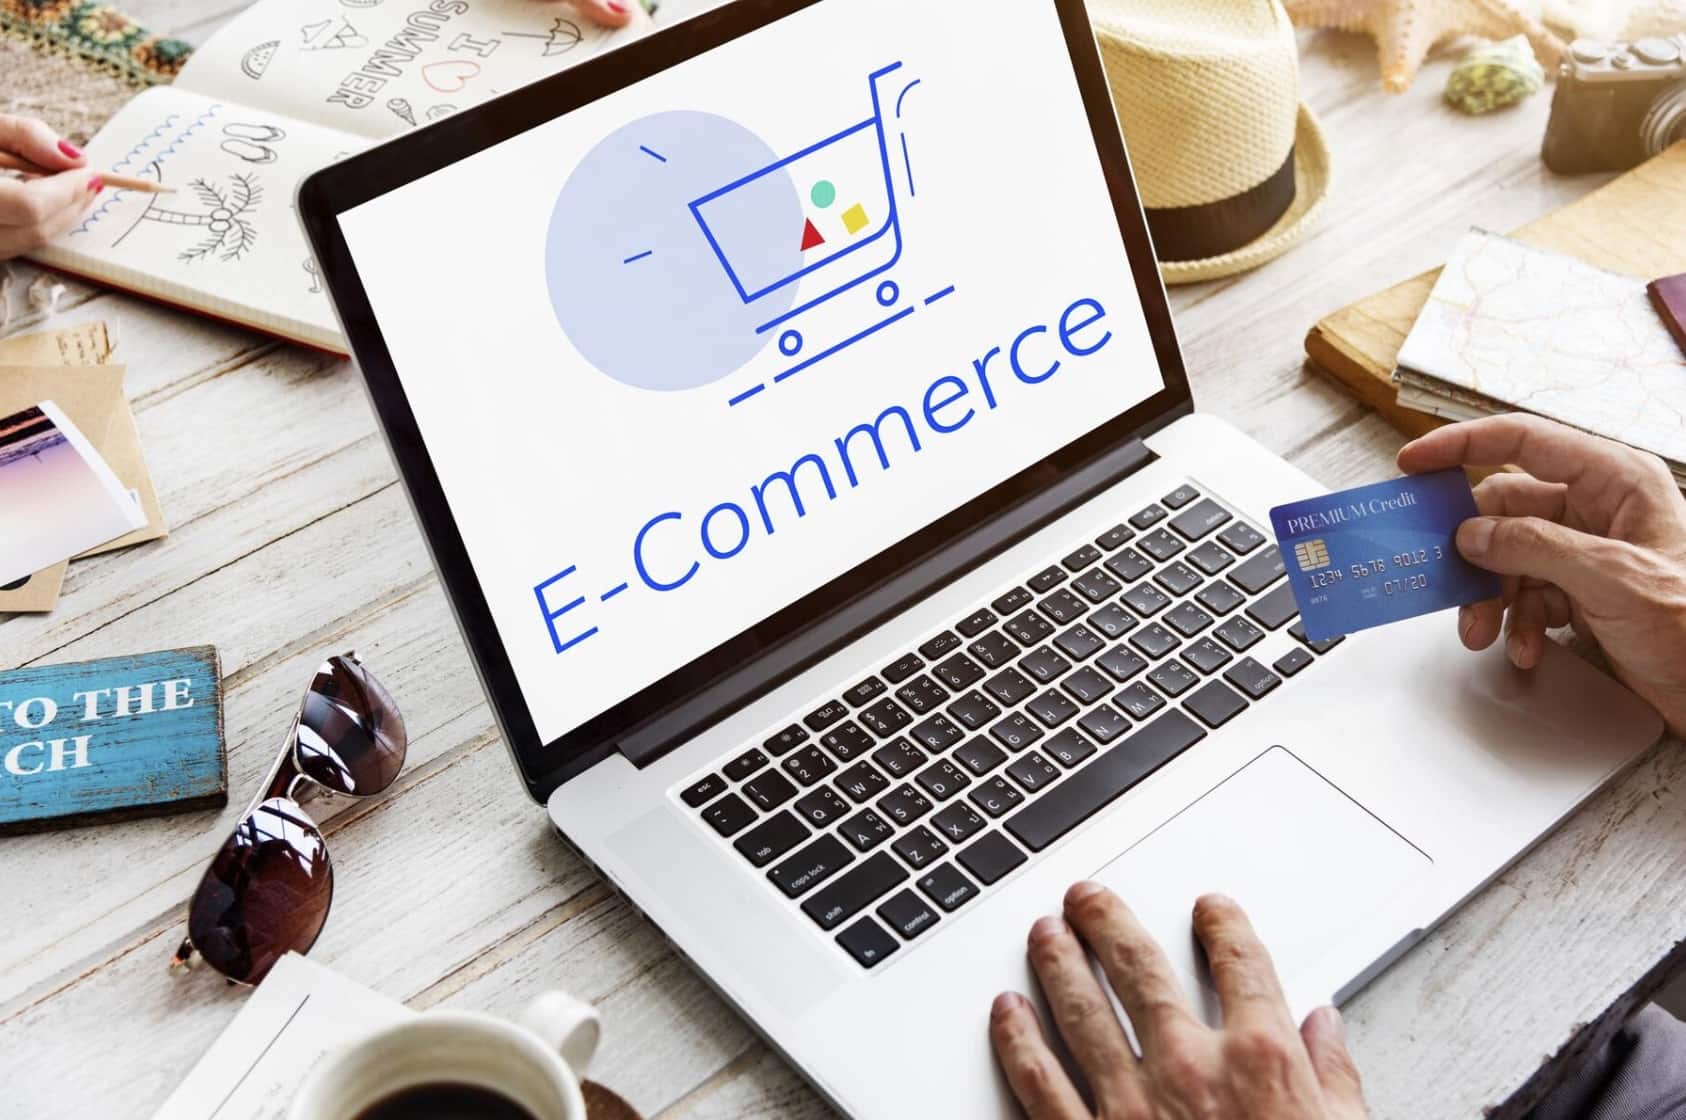 Best-Ecommerce-Platform-For-Small-Business